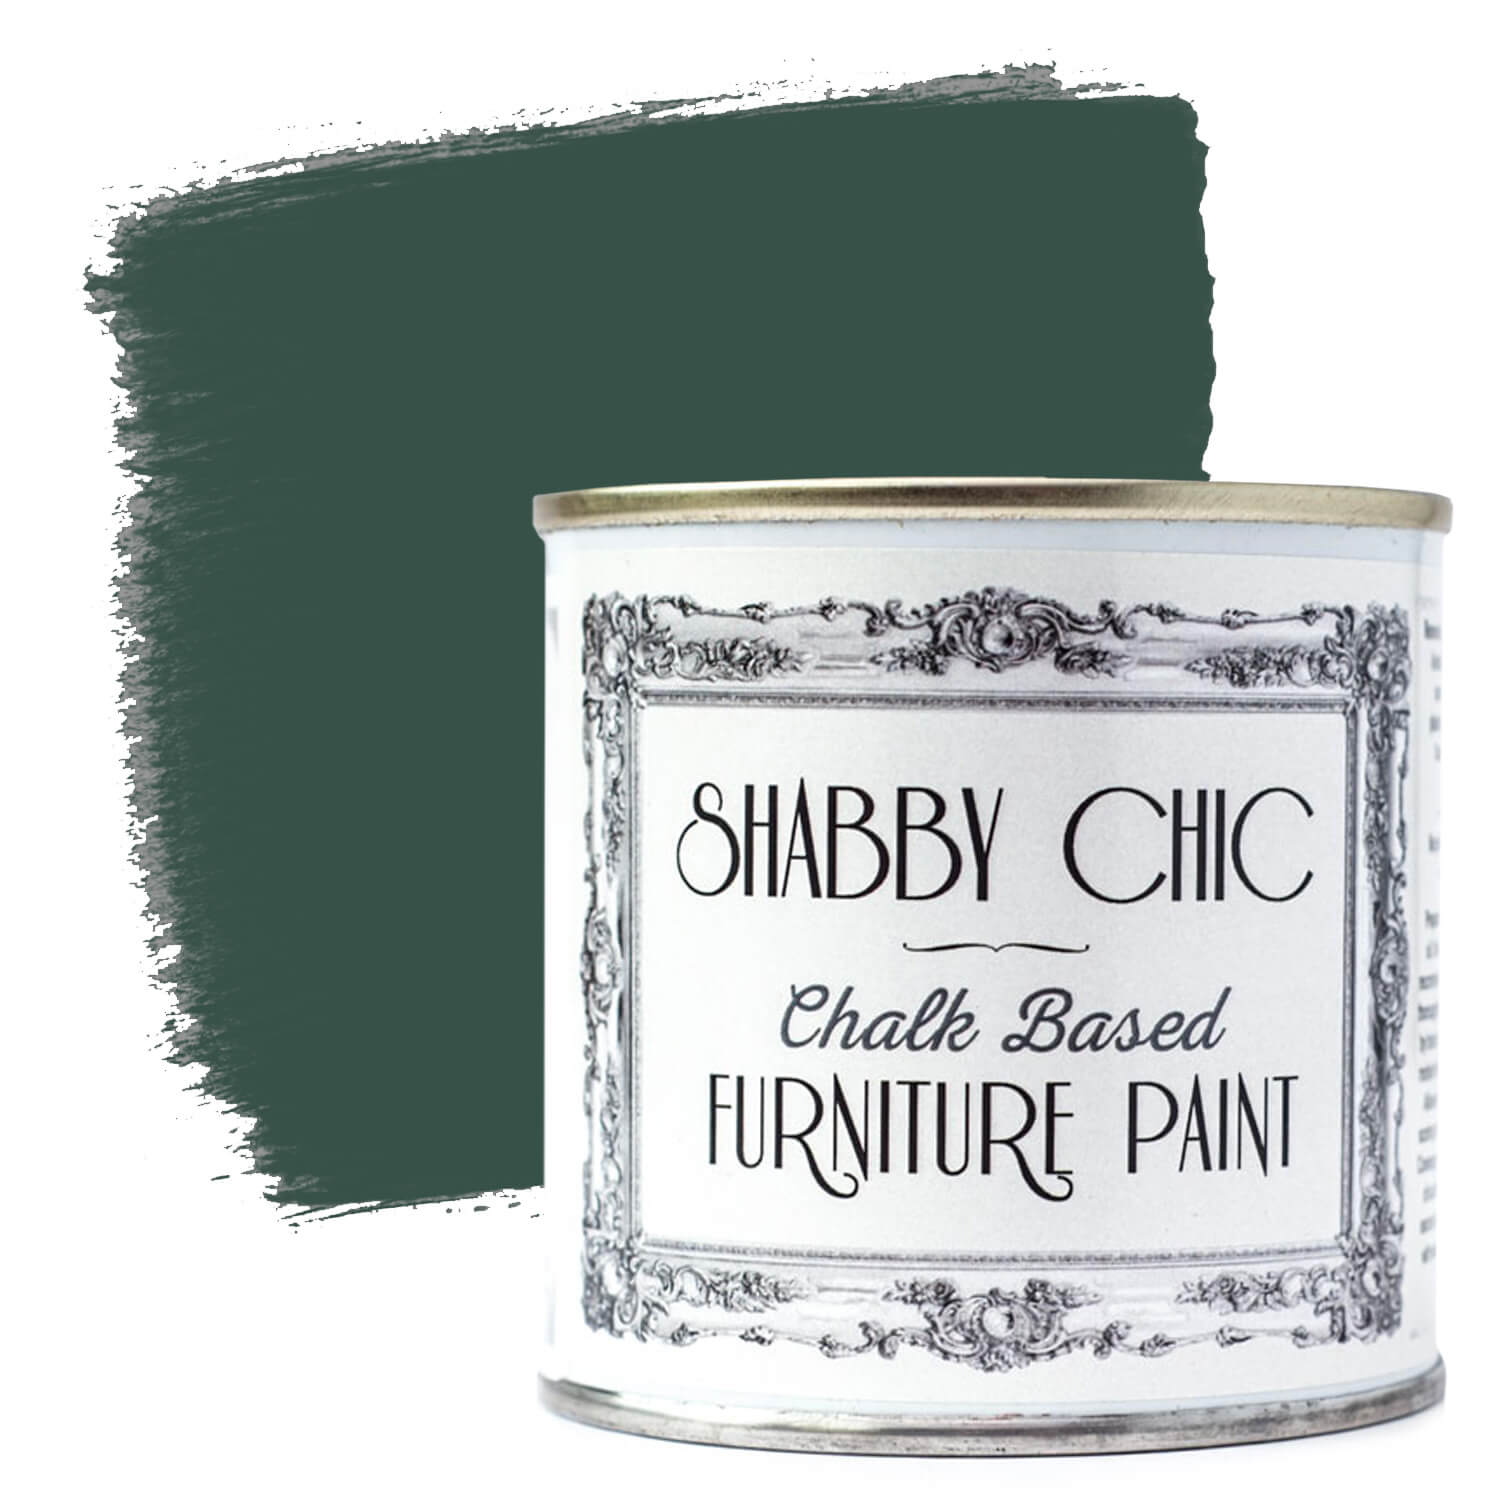 Shabby Chic Furniture Paint in Olivacious